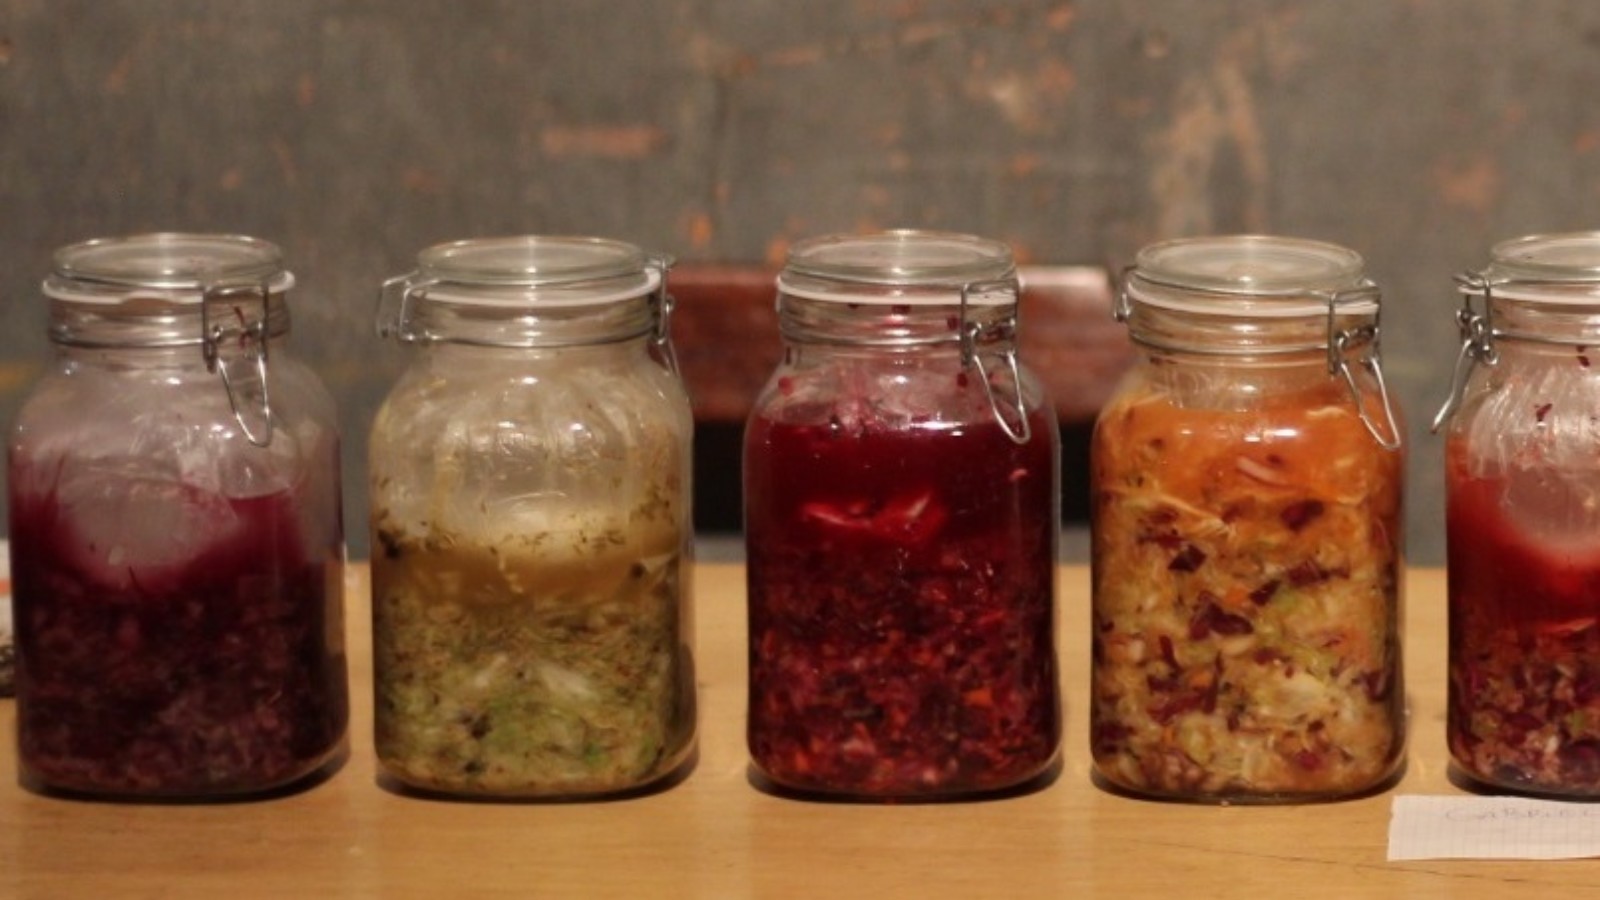 A line of jars are on a wooden table, each has different fermented foods in it.